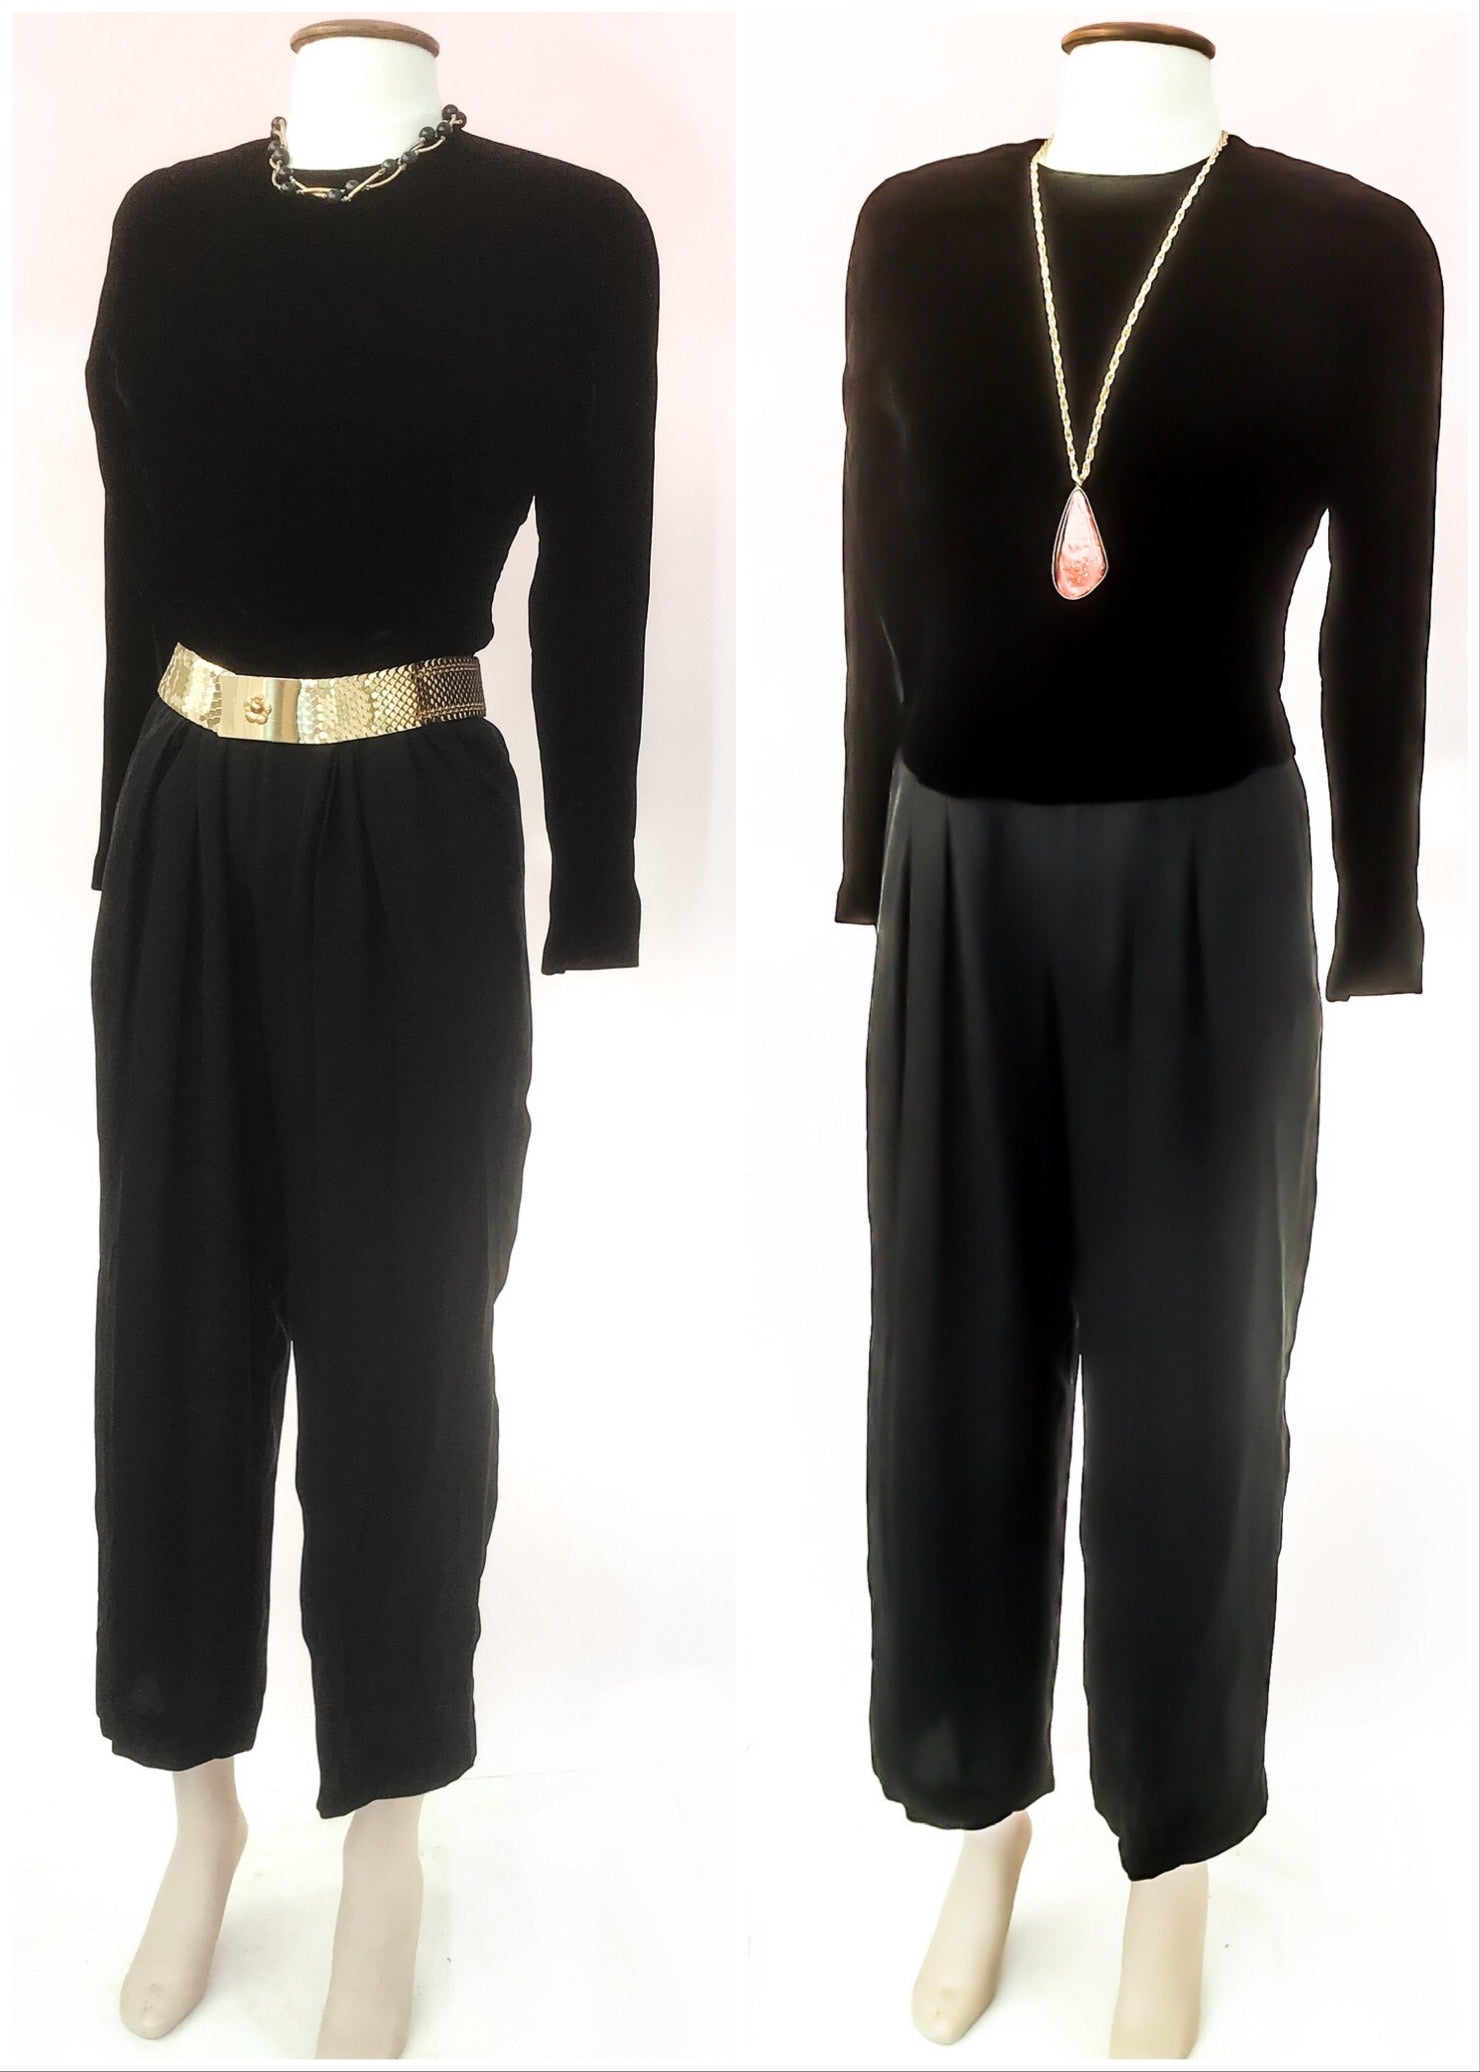 Vintage jumpsuit by Anne Klein from the 80s 90s, long sleevedvelvet body with light and airy georgette tapered legs, perfect for dancing.